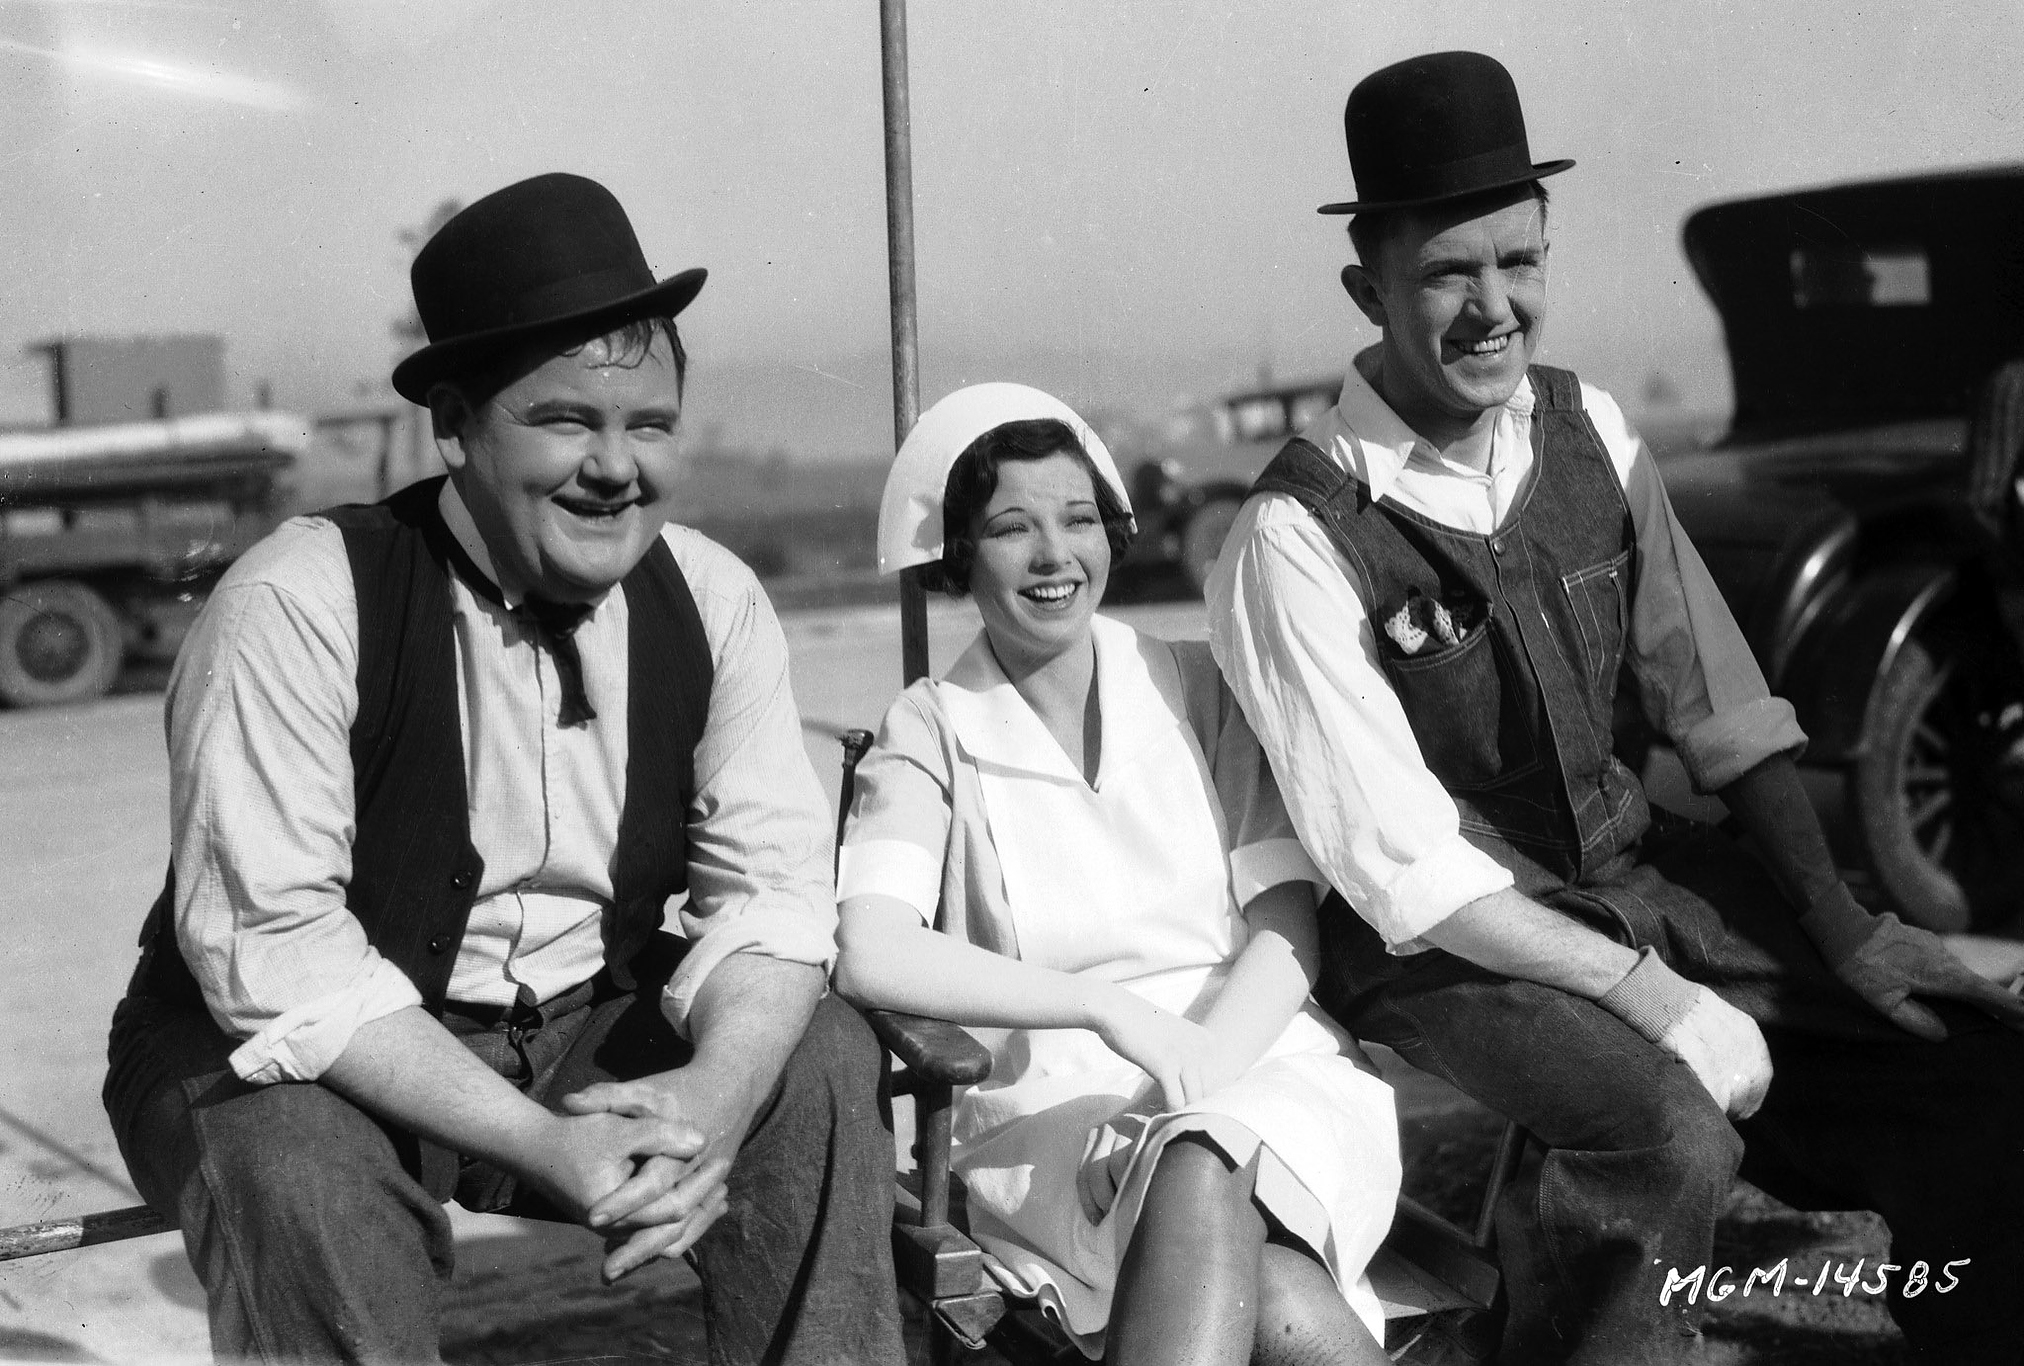 Oliver Hardy and Stan Laurel with Dorothy Coburn during the filming of 'The Finishing Touch', directed by Leo McCarey and Clyde Bruckman, 1928.